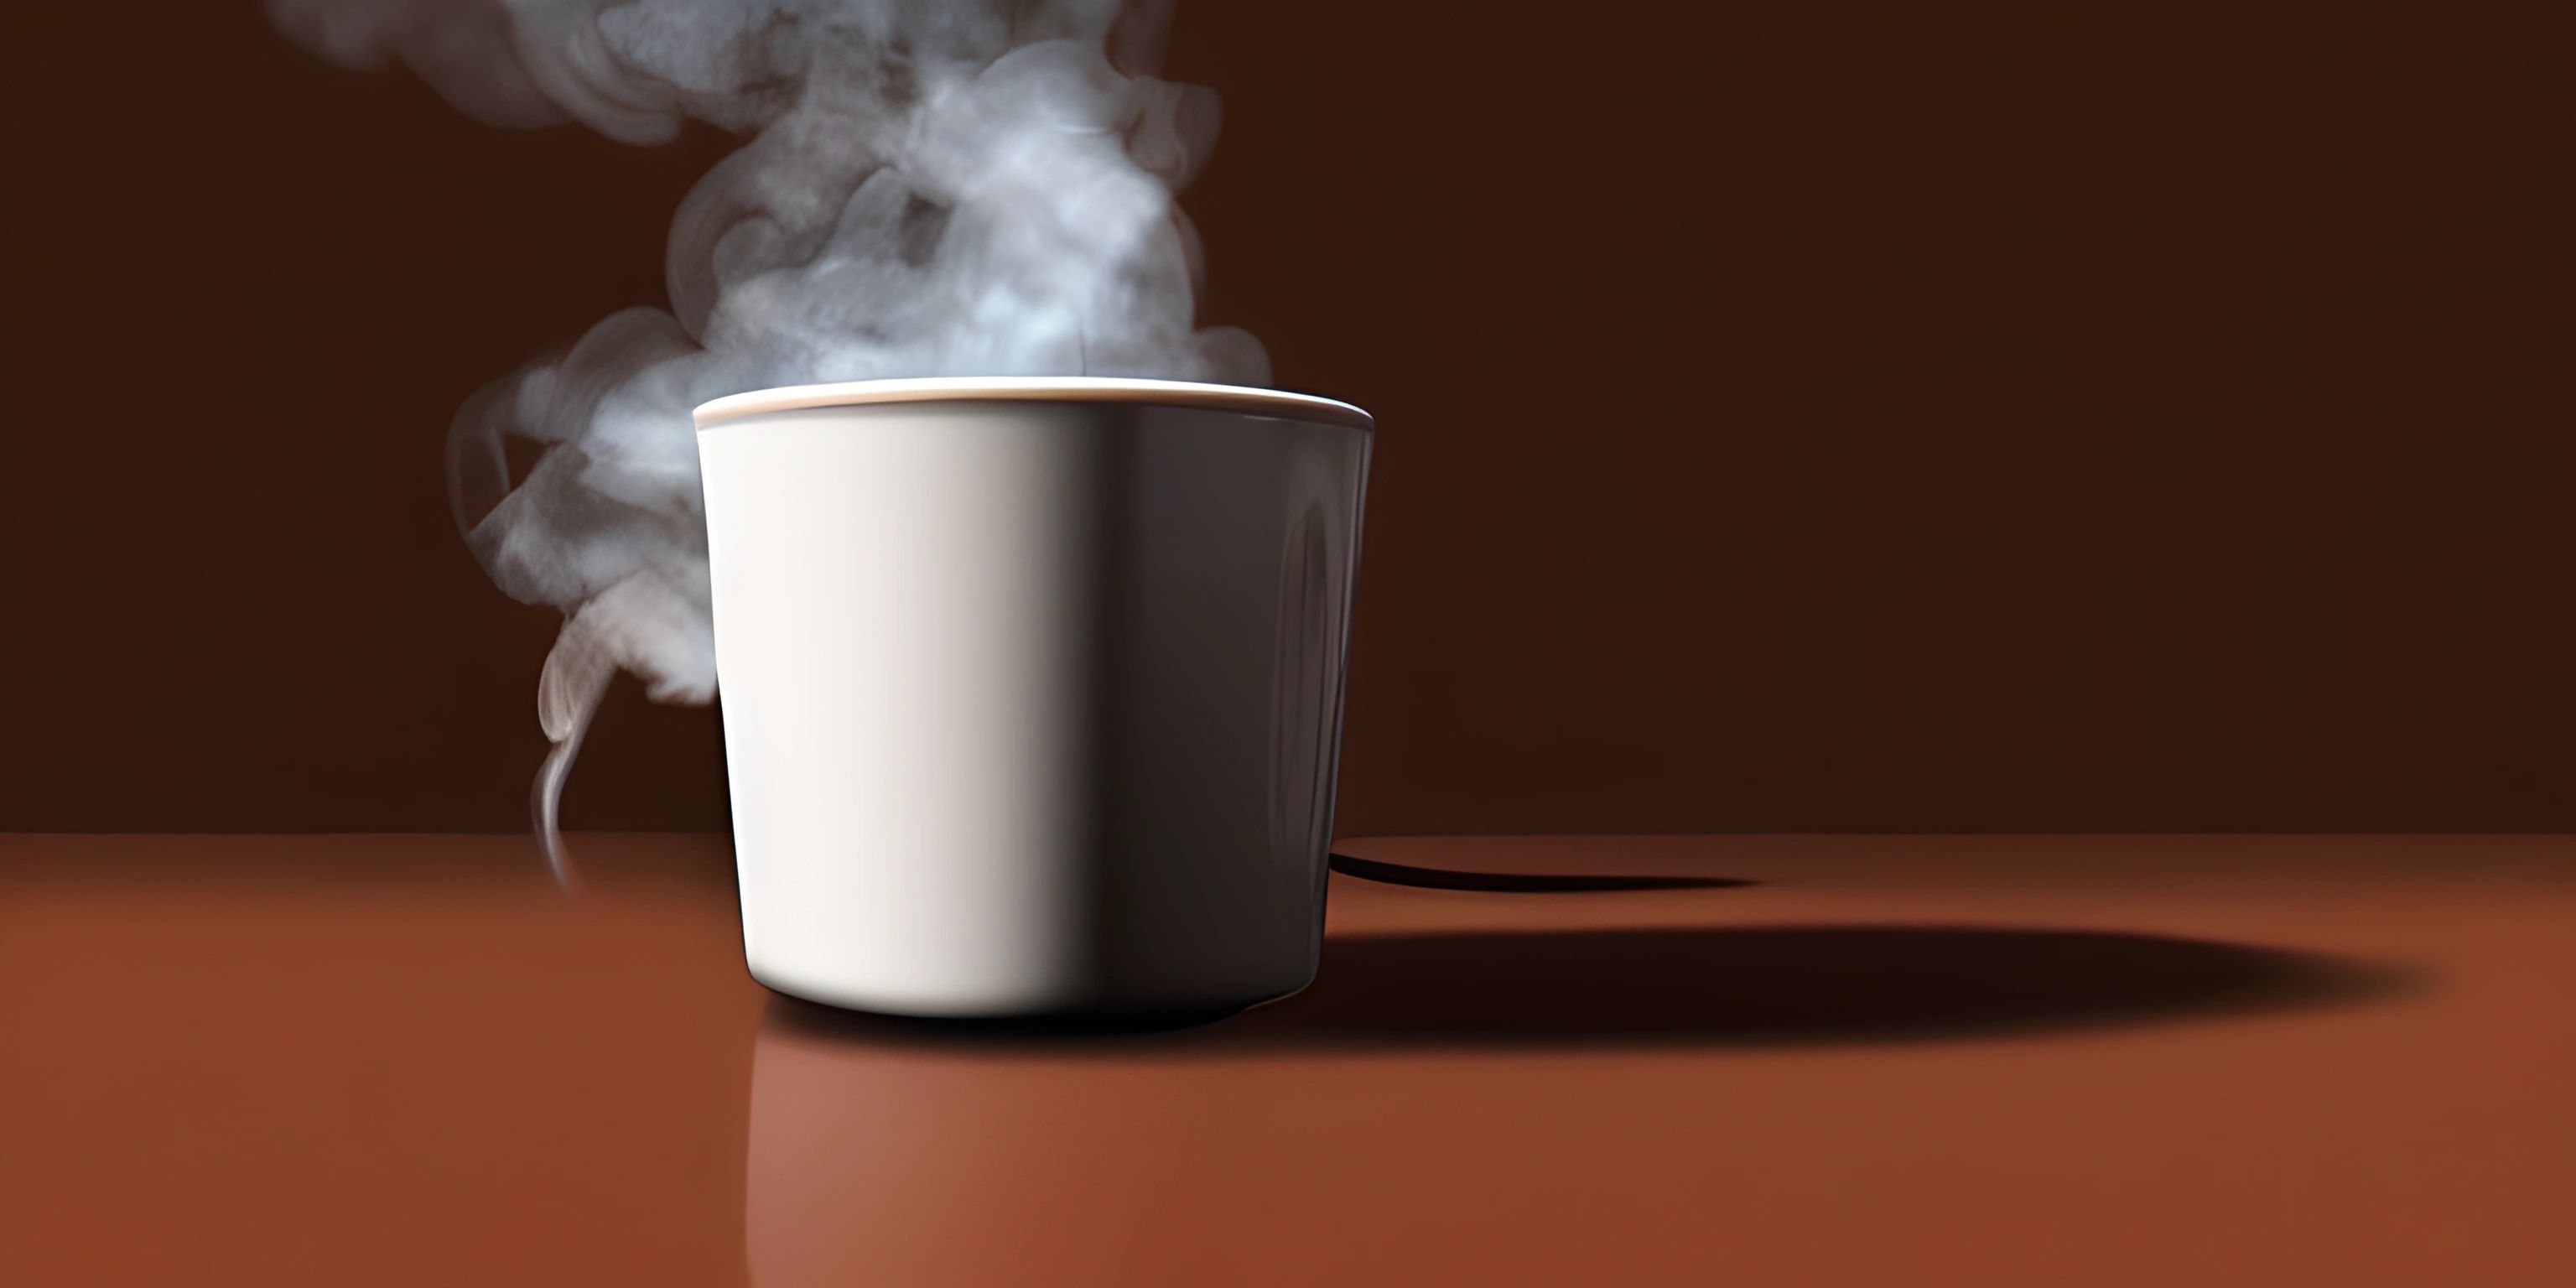 the steaming coffee cup looks like it is floating down into water while being heated or steam